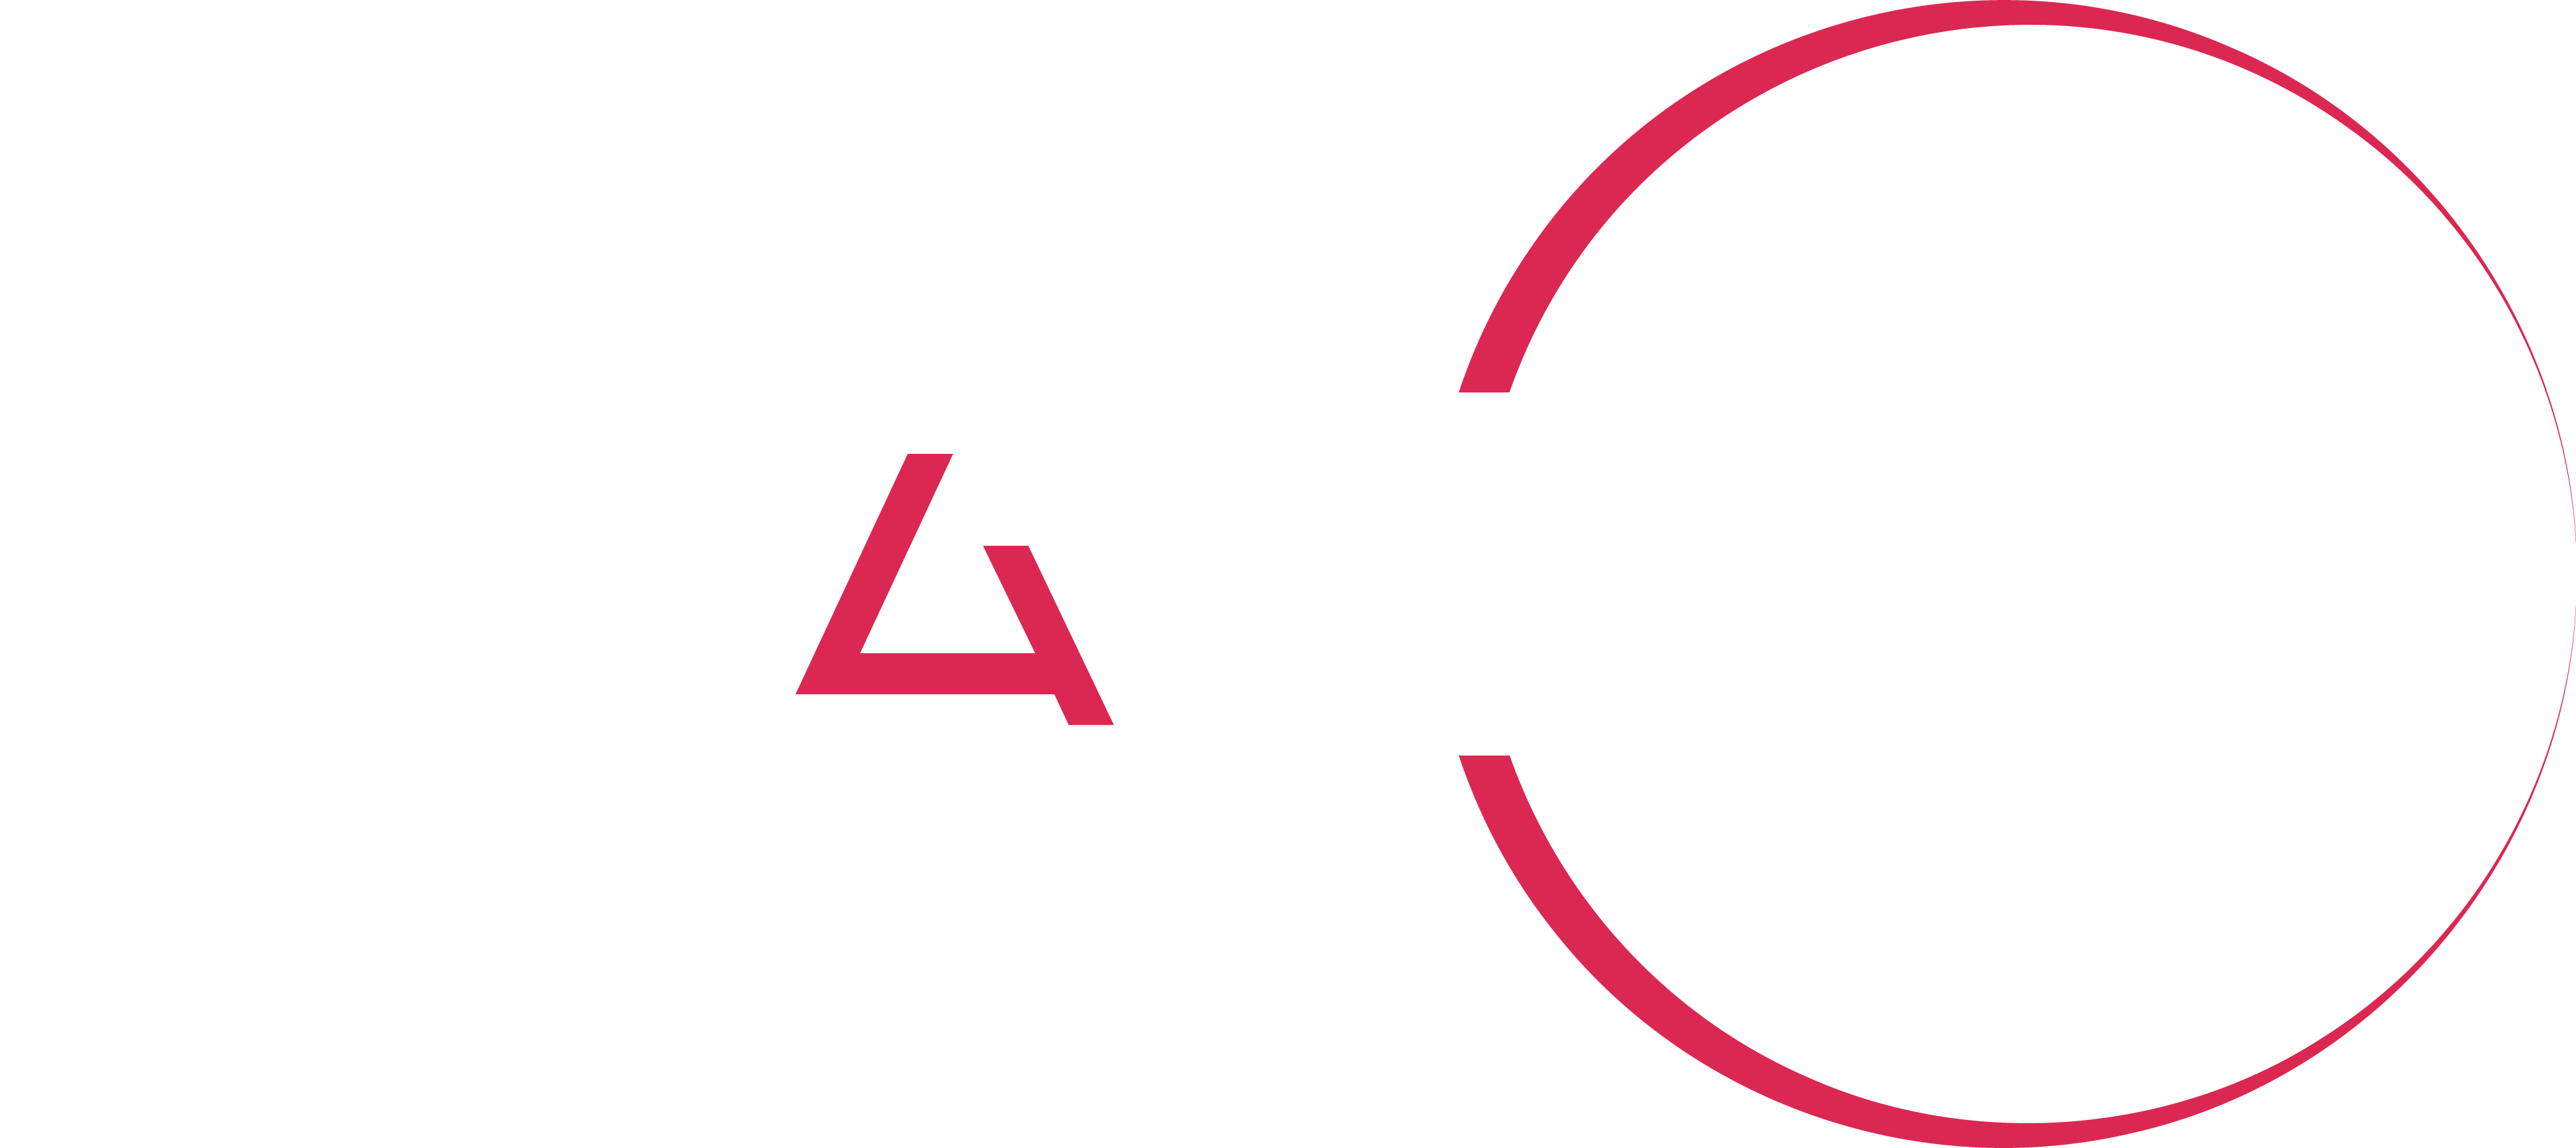 Solution for space project​